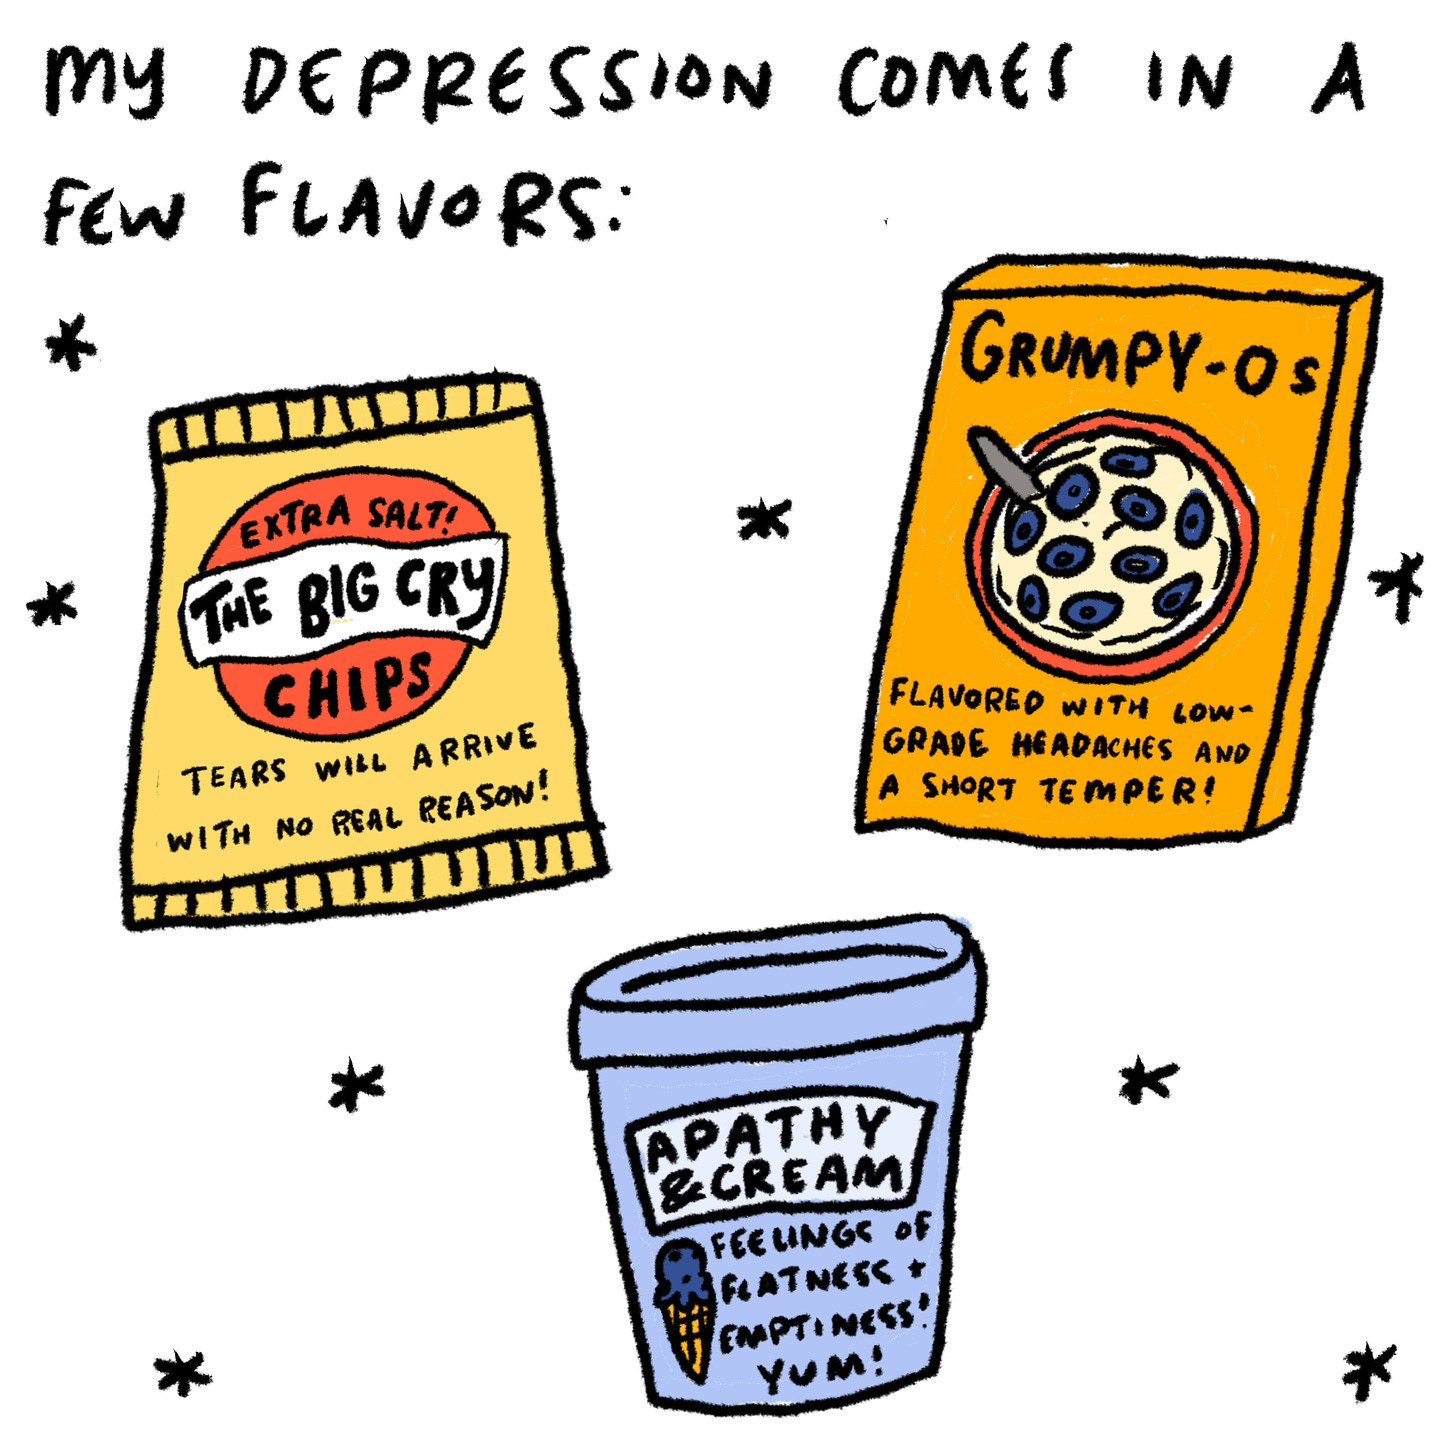 It looks a little different each time.  Chips bag: The Big Cry: tears that arrive with no real reason! Extra salty.  Cereal box: Grumpy-O’s. Flavored with low grade headaches and a short temper! Ice cream carton: Apathy and cream. Feelings of flatness and emptiness! Yum!